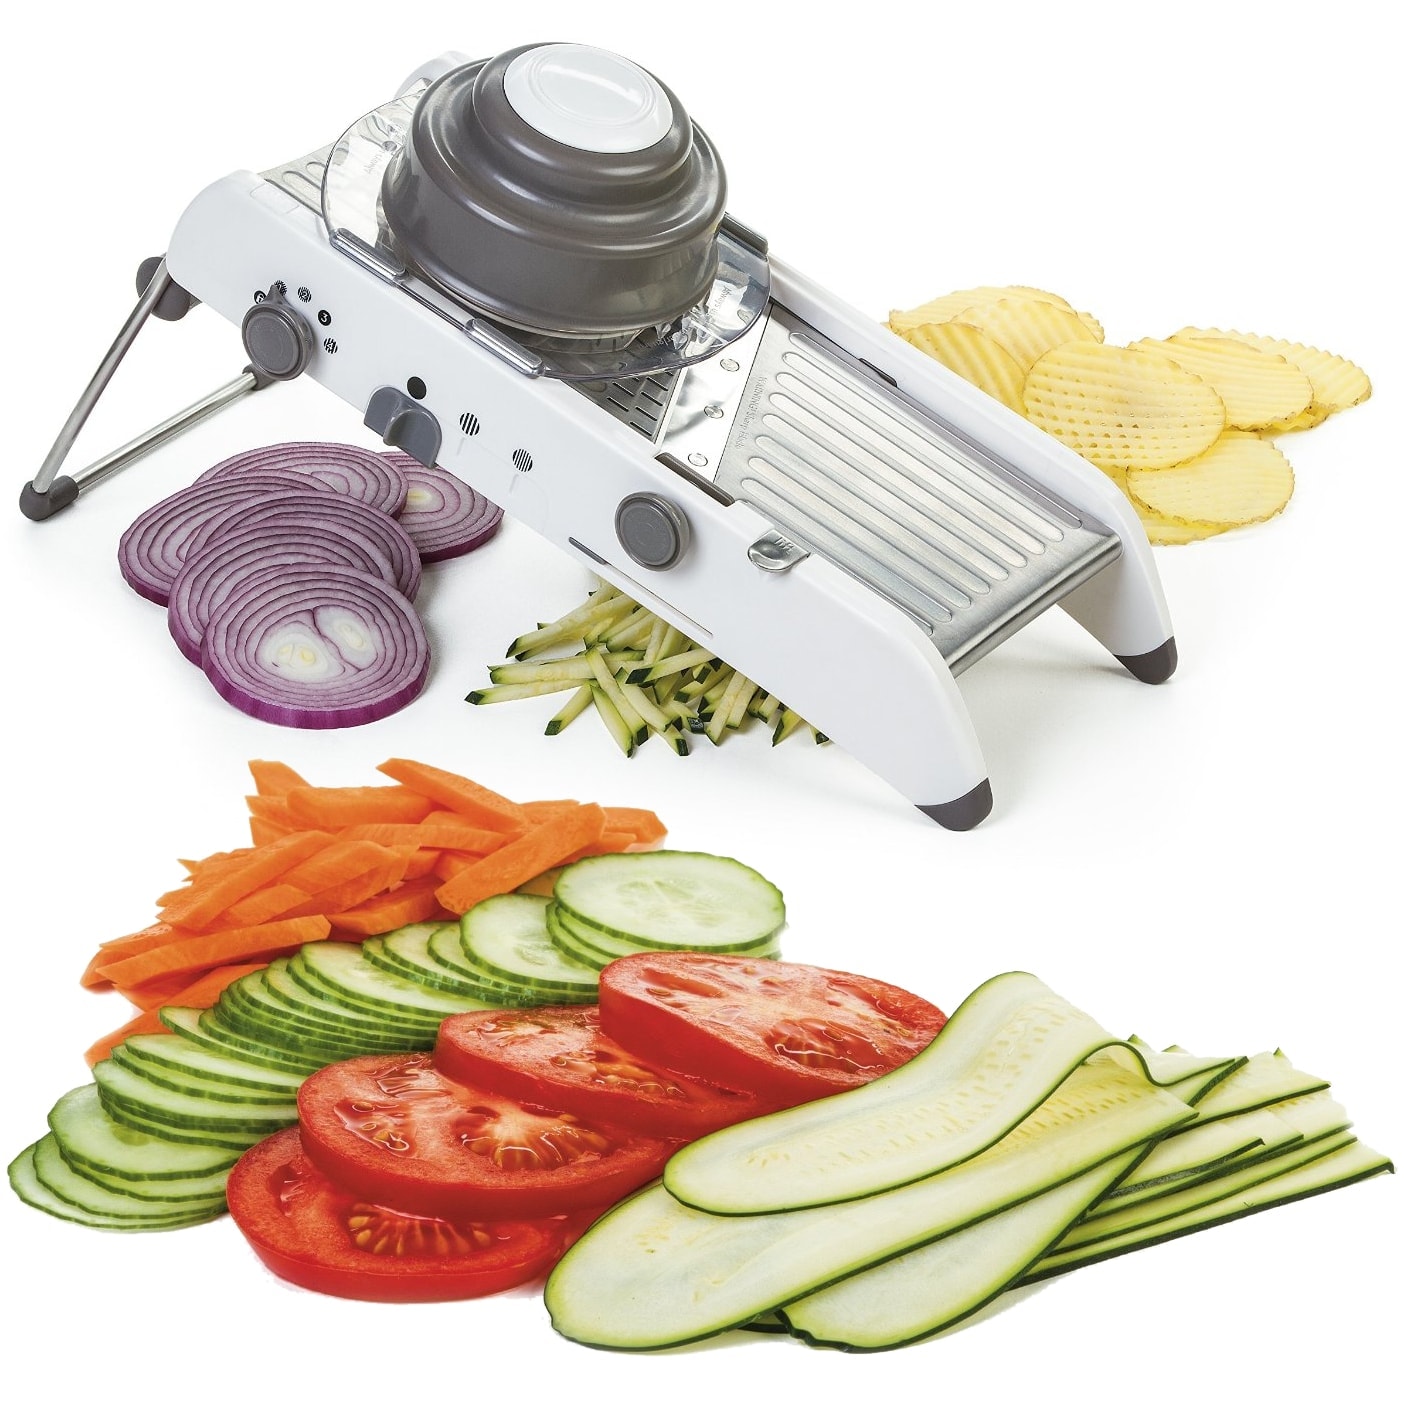 Tuesday's Tip with The Kitchen Whisperer – Mandoline Slicing